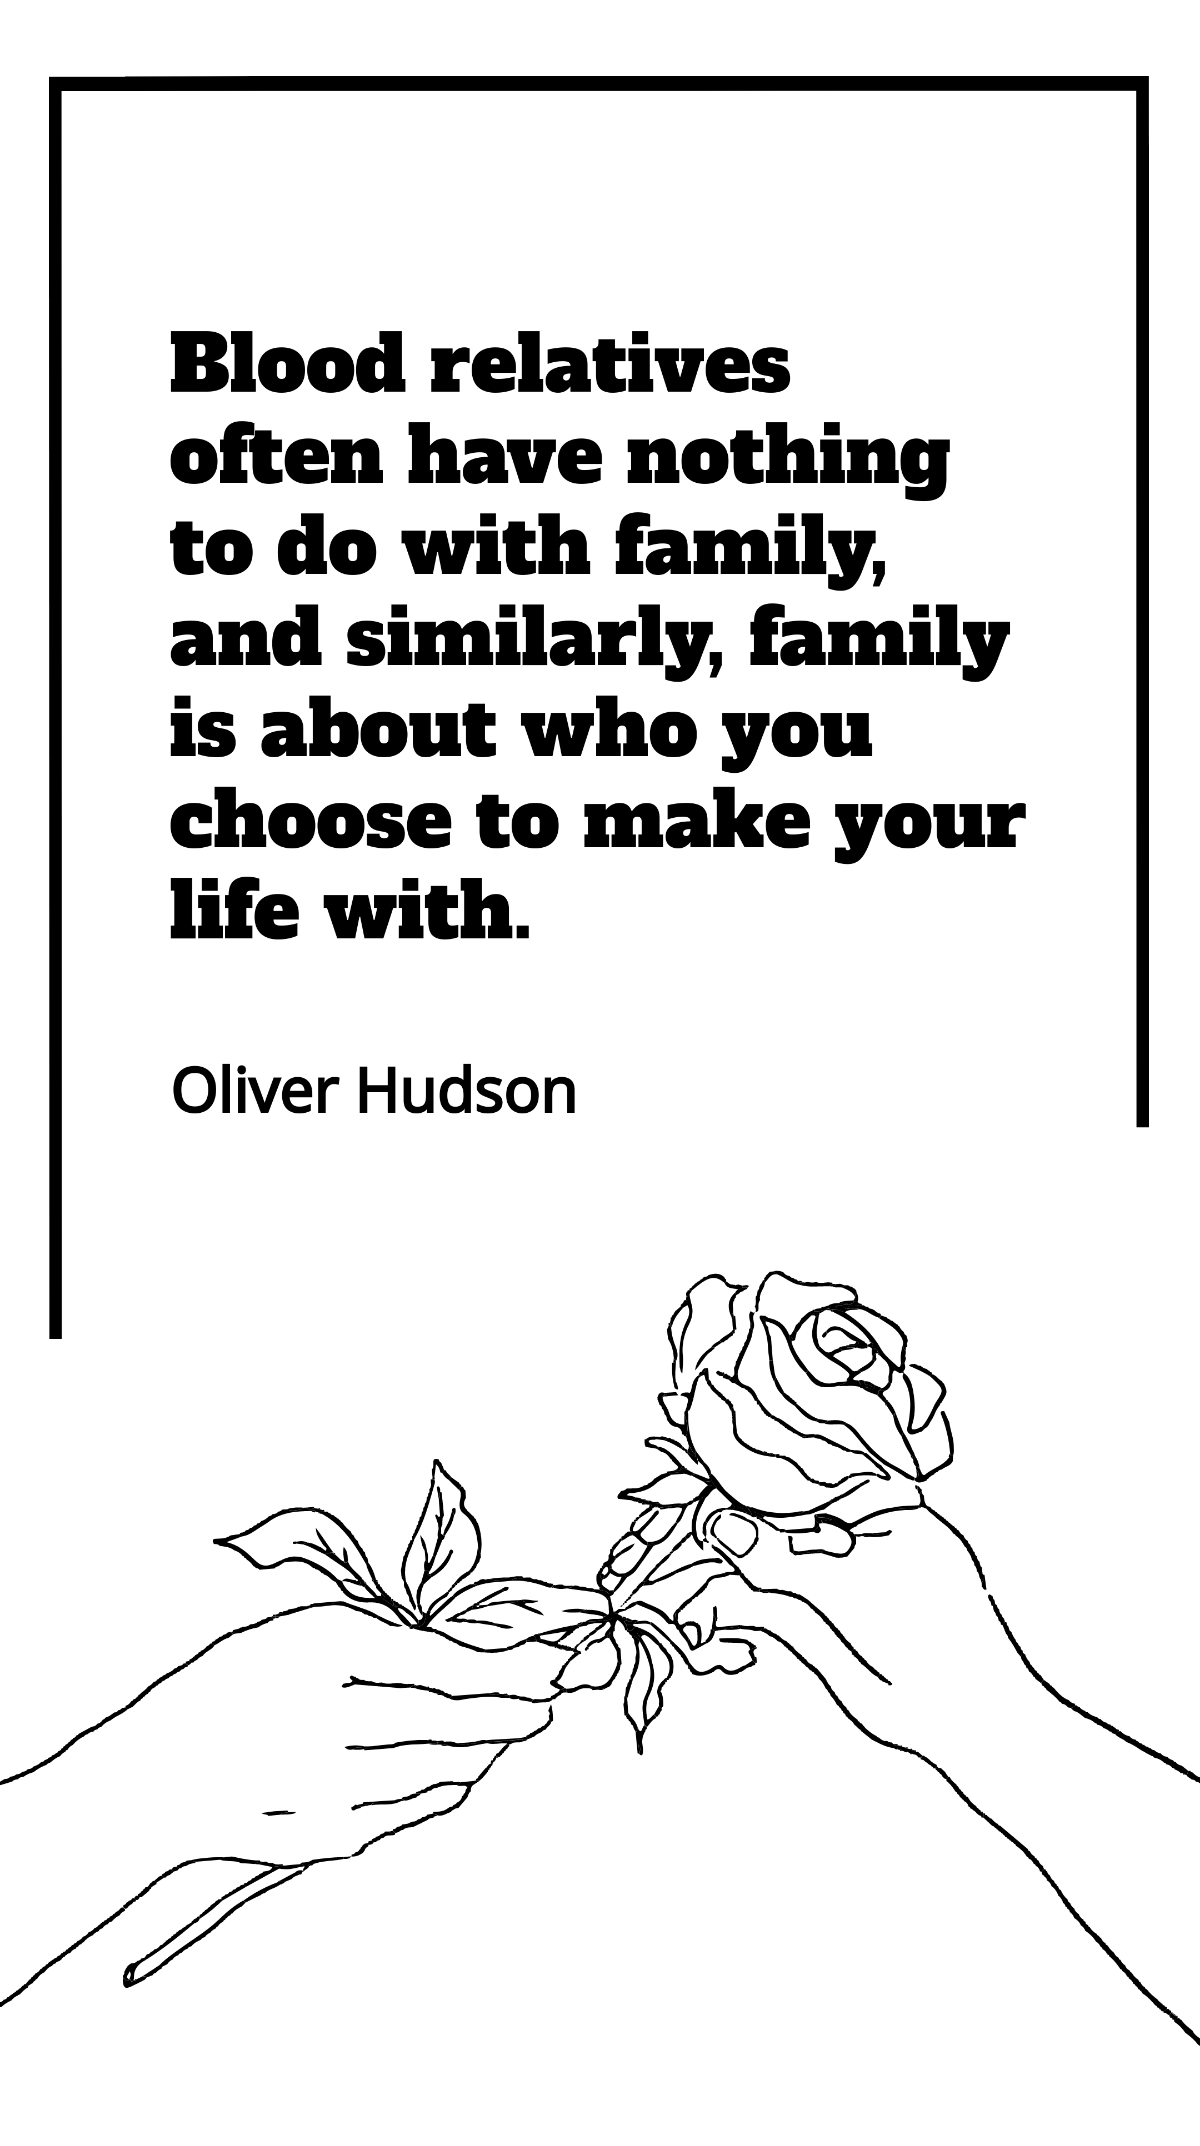 Oliver Hudson - Blood relatives often have nothing to do with family, and similarly, family is about who you choose to make your life with. Template